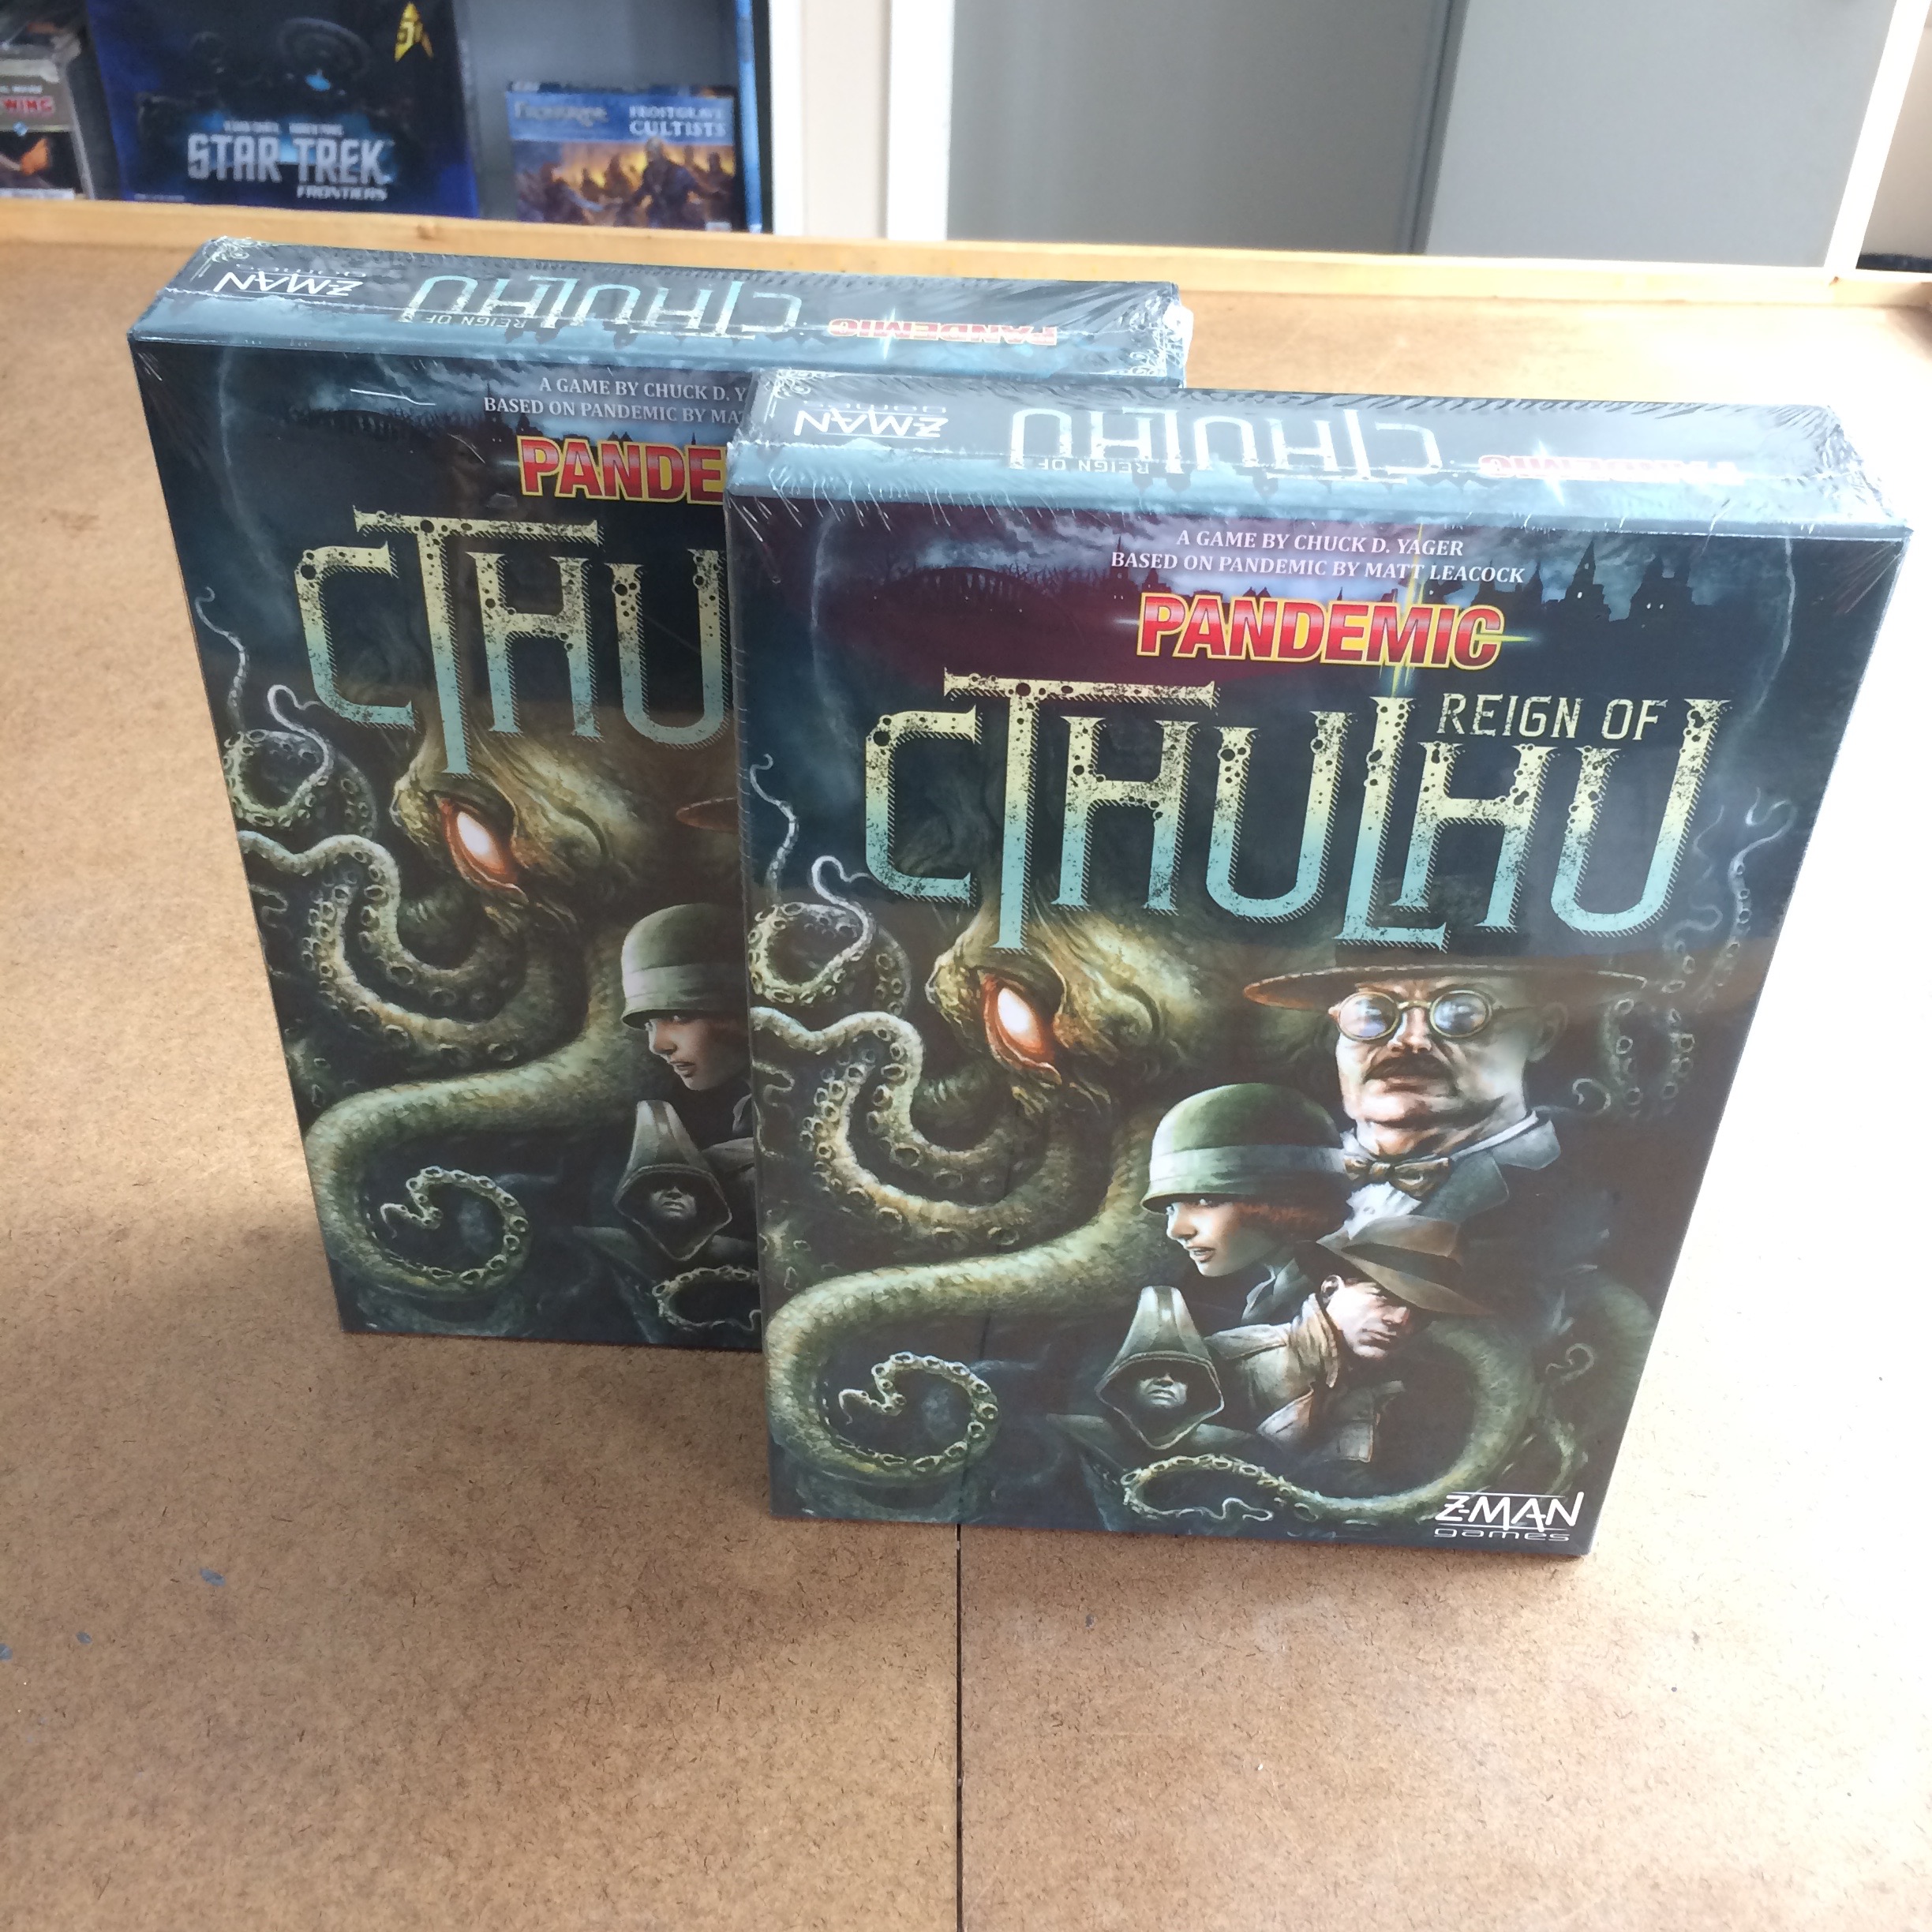 Pandemic… Now with more tentacles!